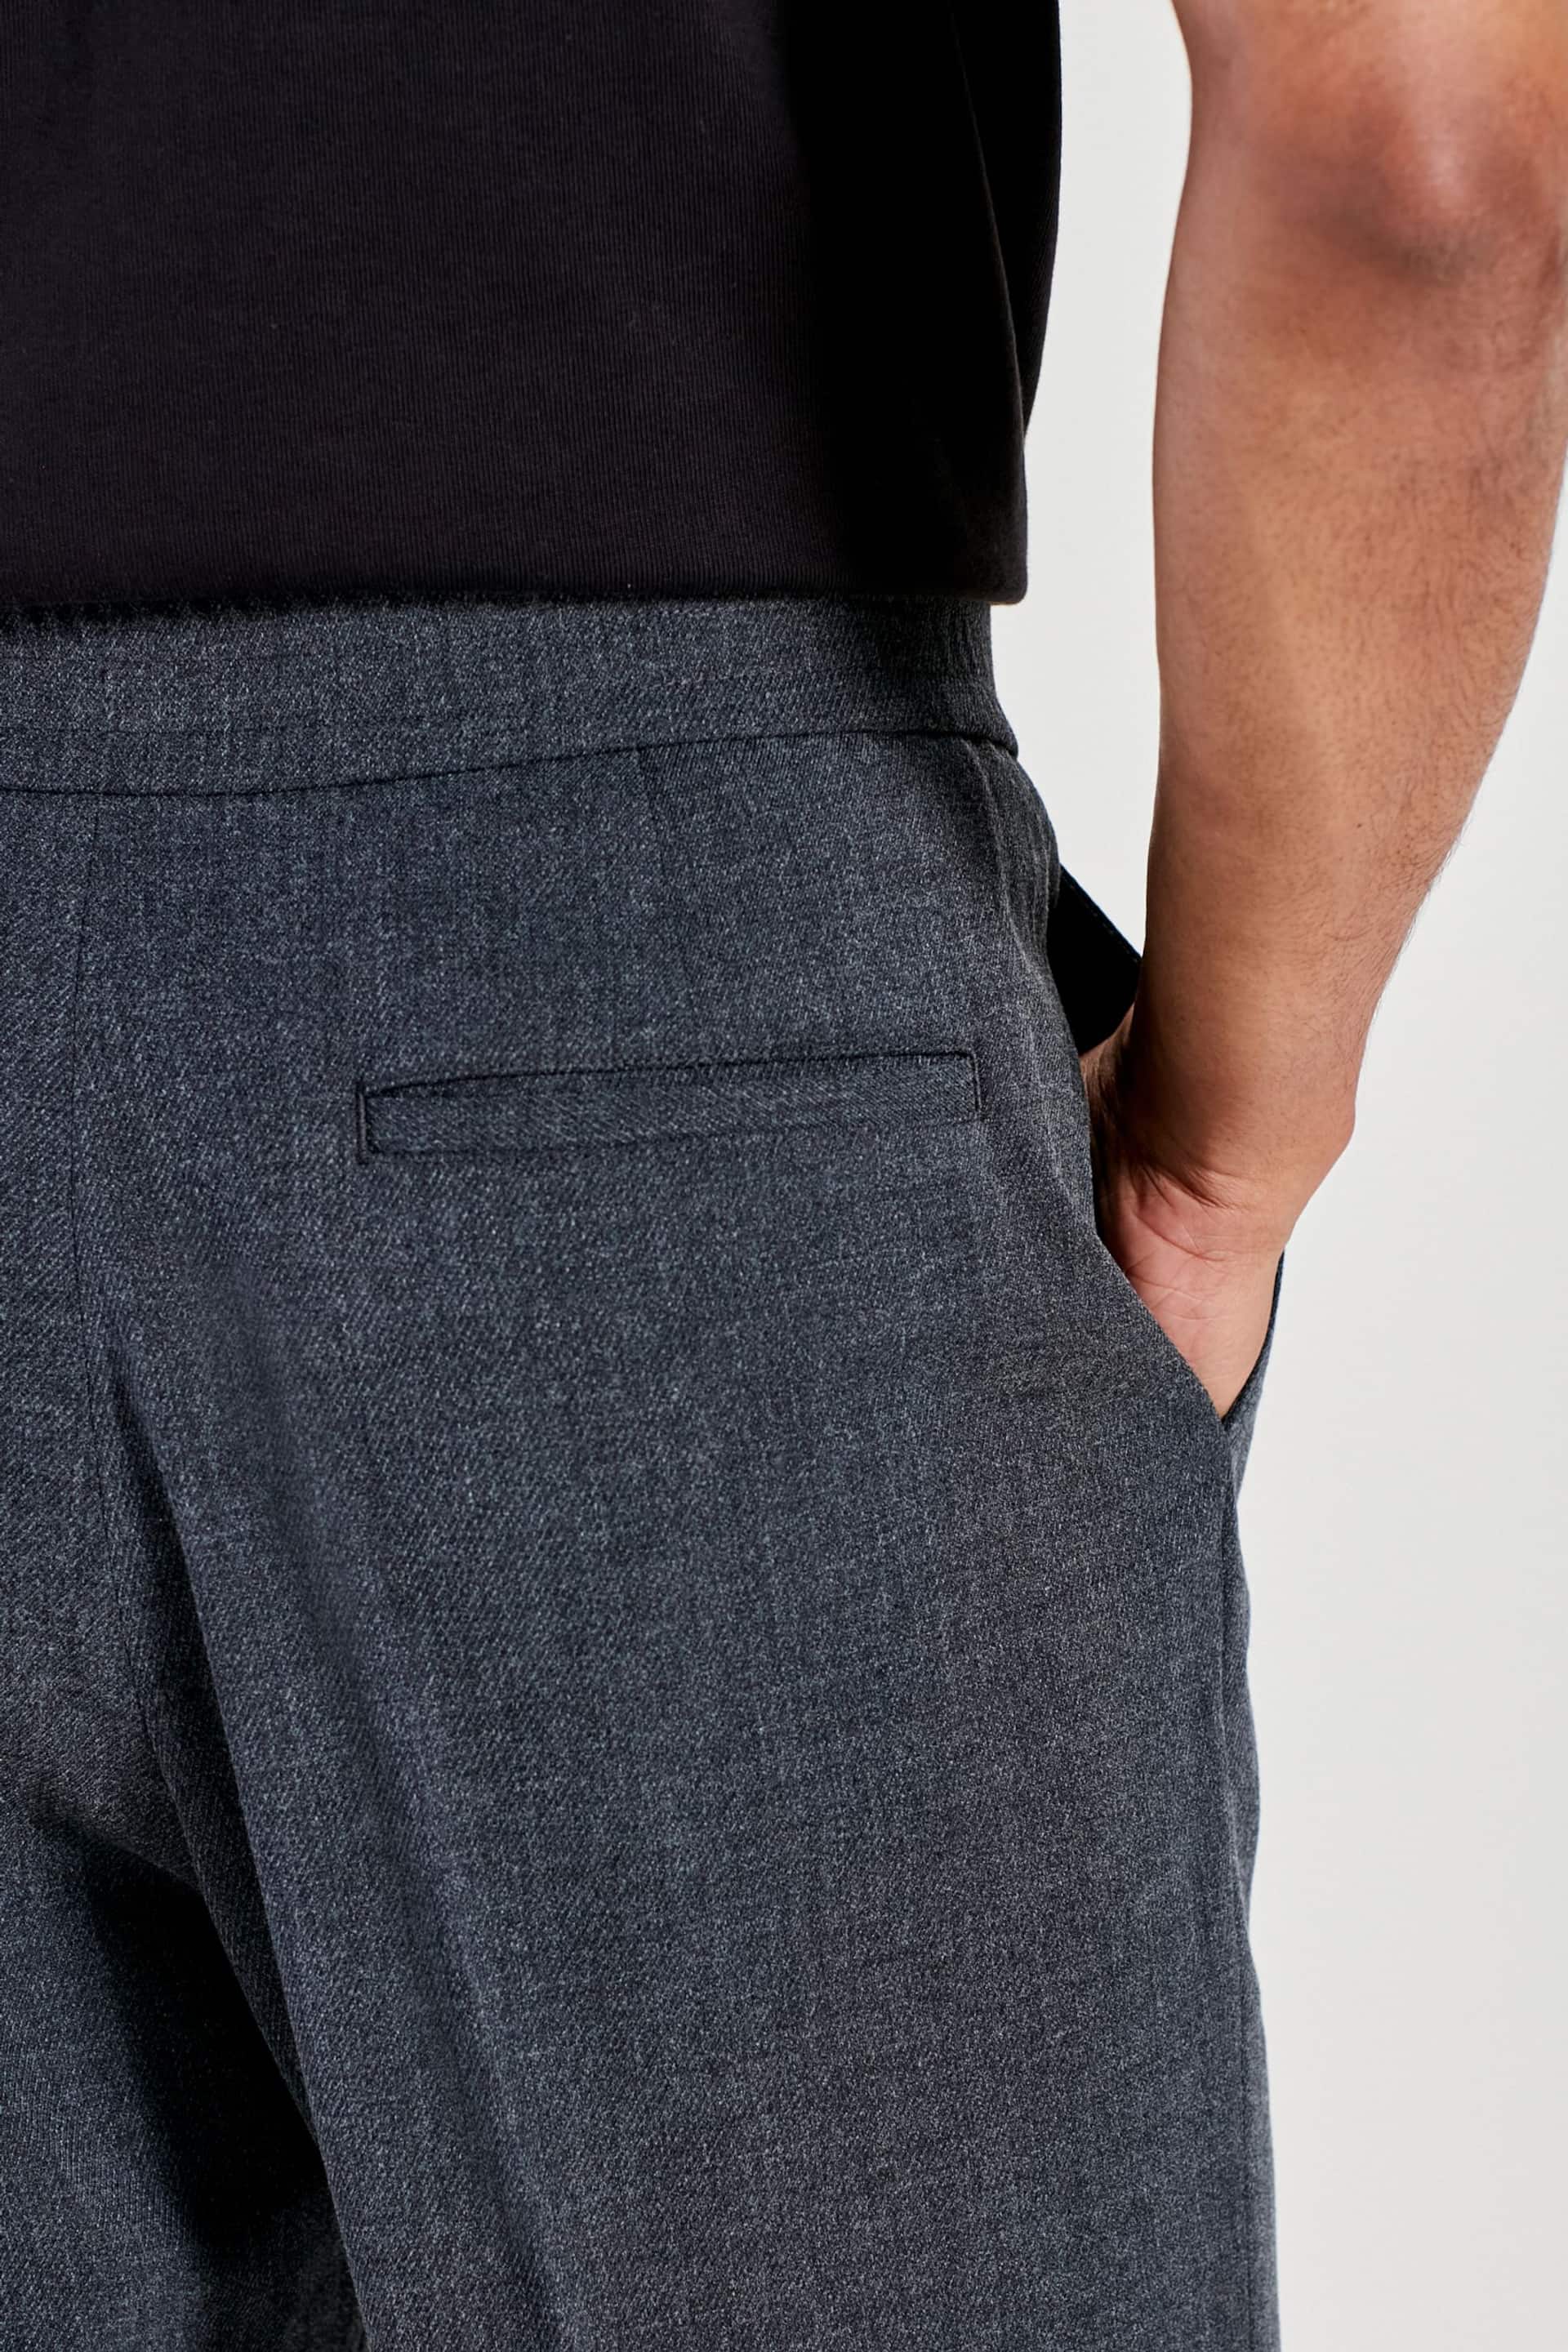 Charcoal Grey Relaxed Fit EDIT Jogger Trousers - Image 5 of 9